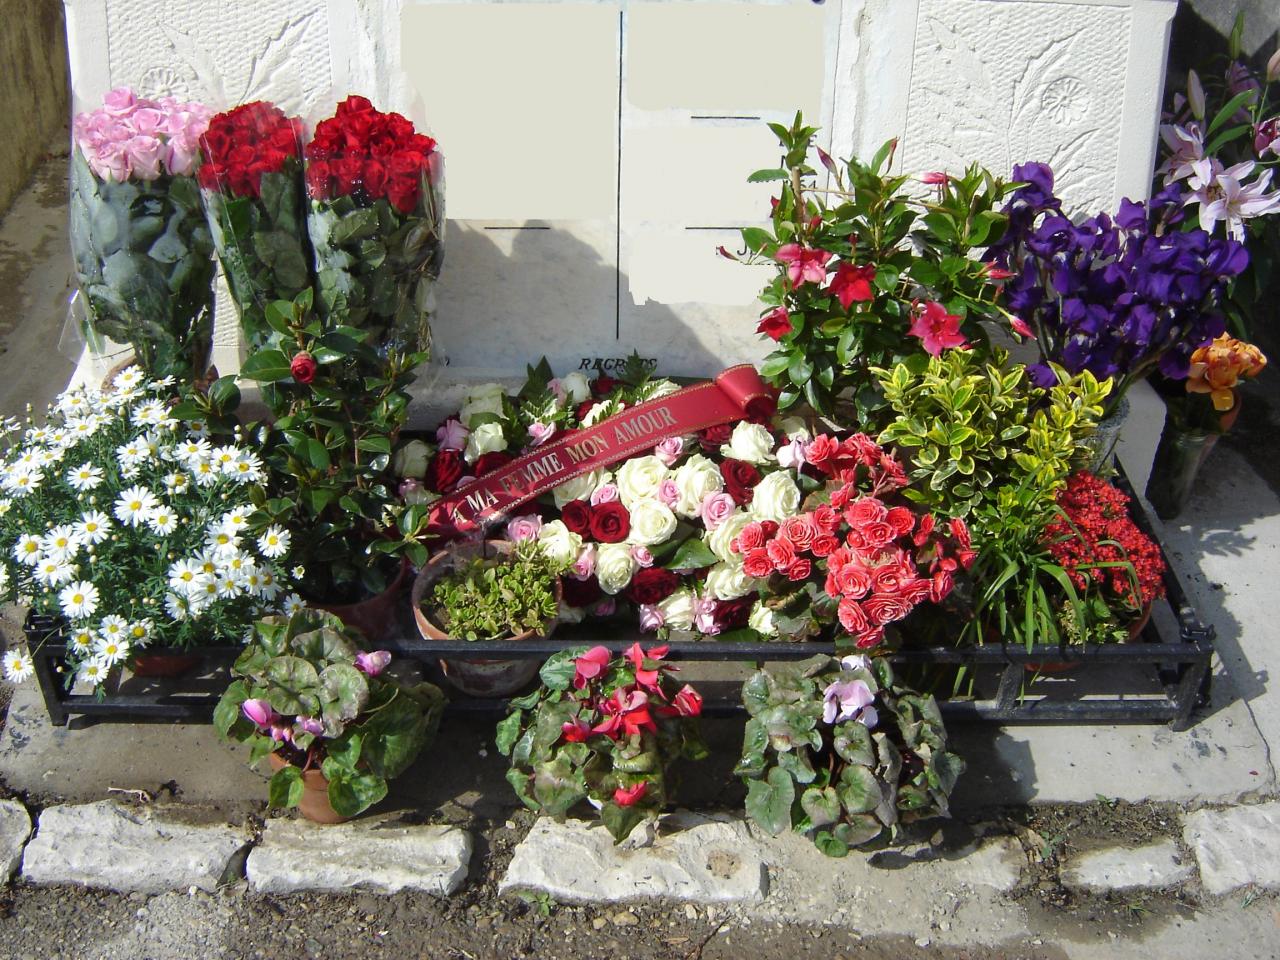 April 22nd 2010. The flowers for my beloved wife at her grave.